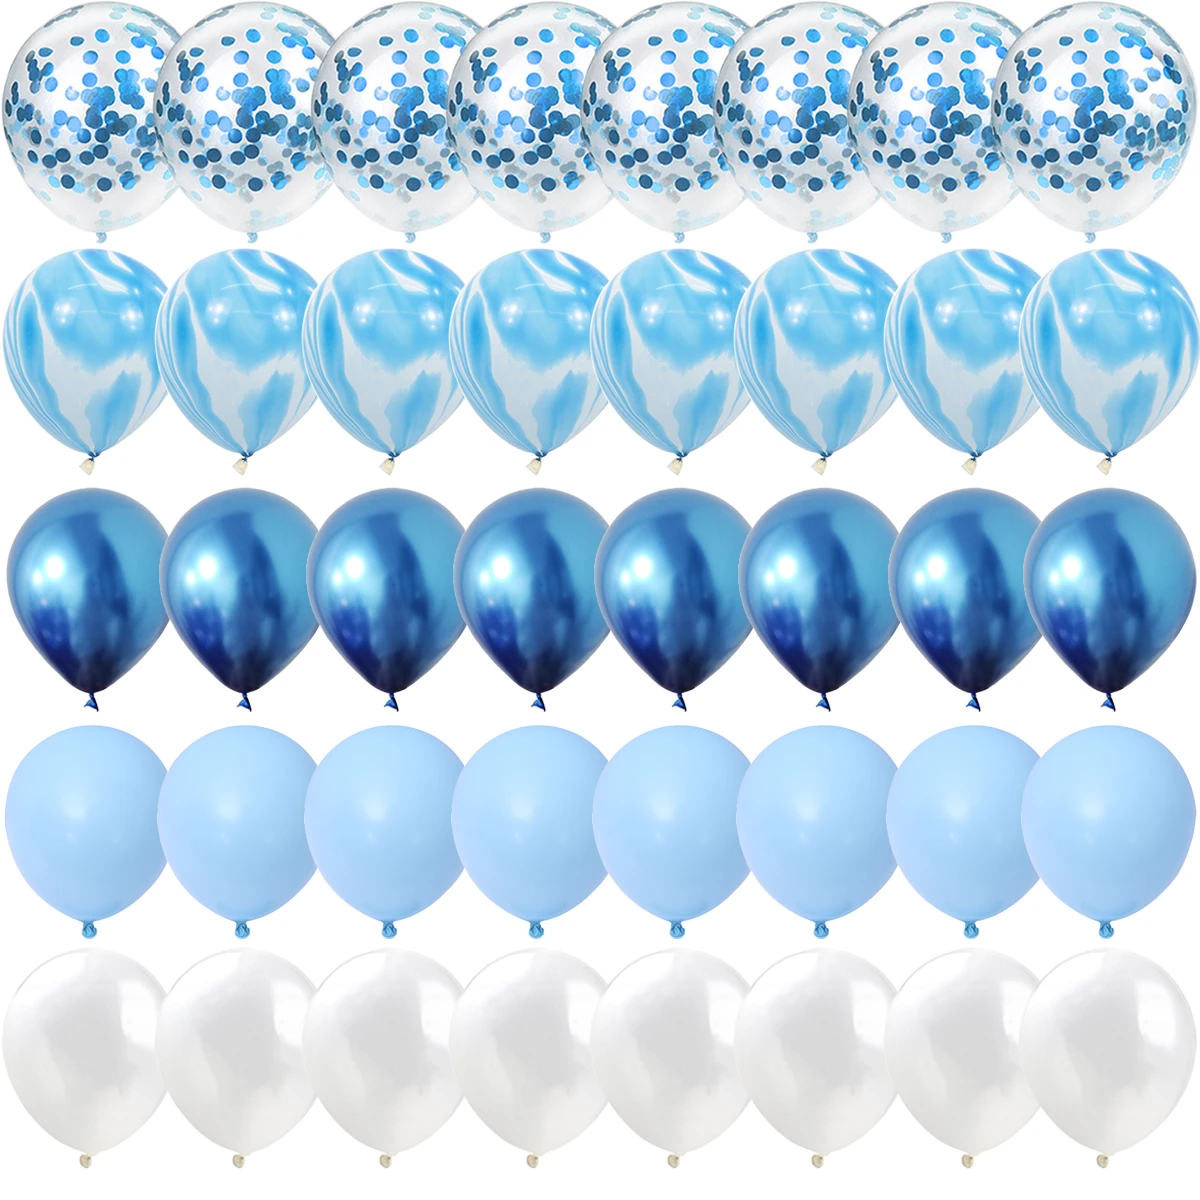 40 Pcs Blue Set Agate Marble Balloons Silver Confetti Balloon Wedding Valentine's Day Baby Shower Birthday Party Decorations